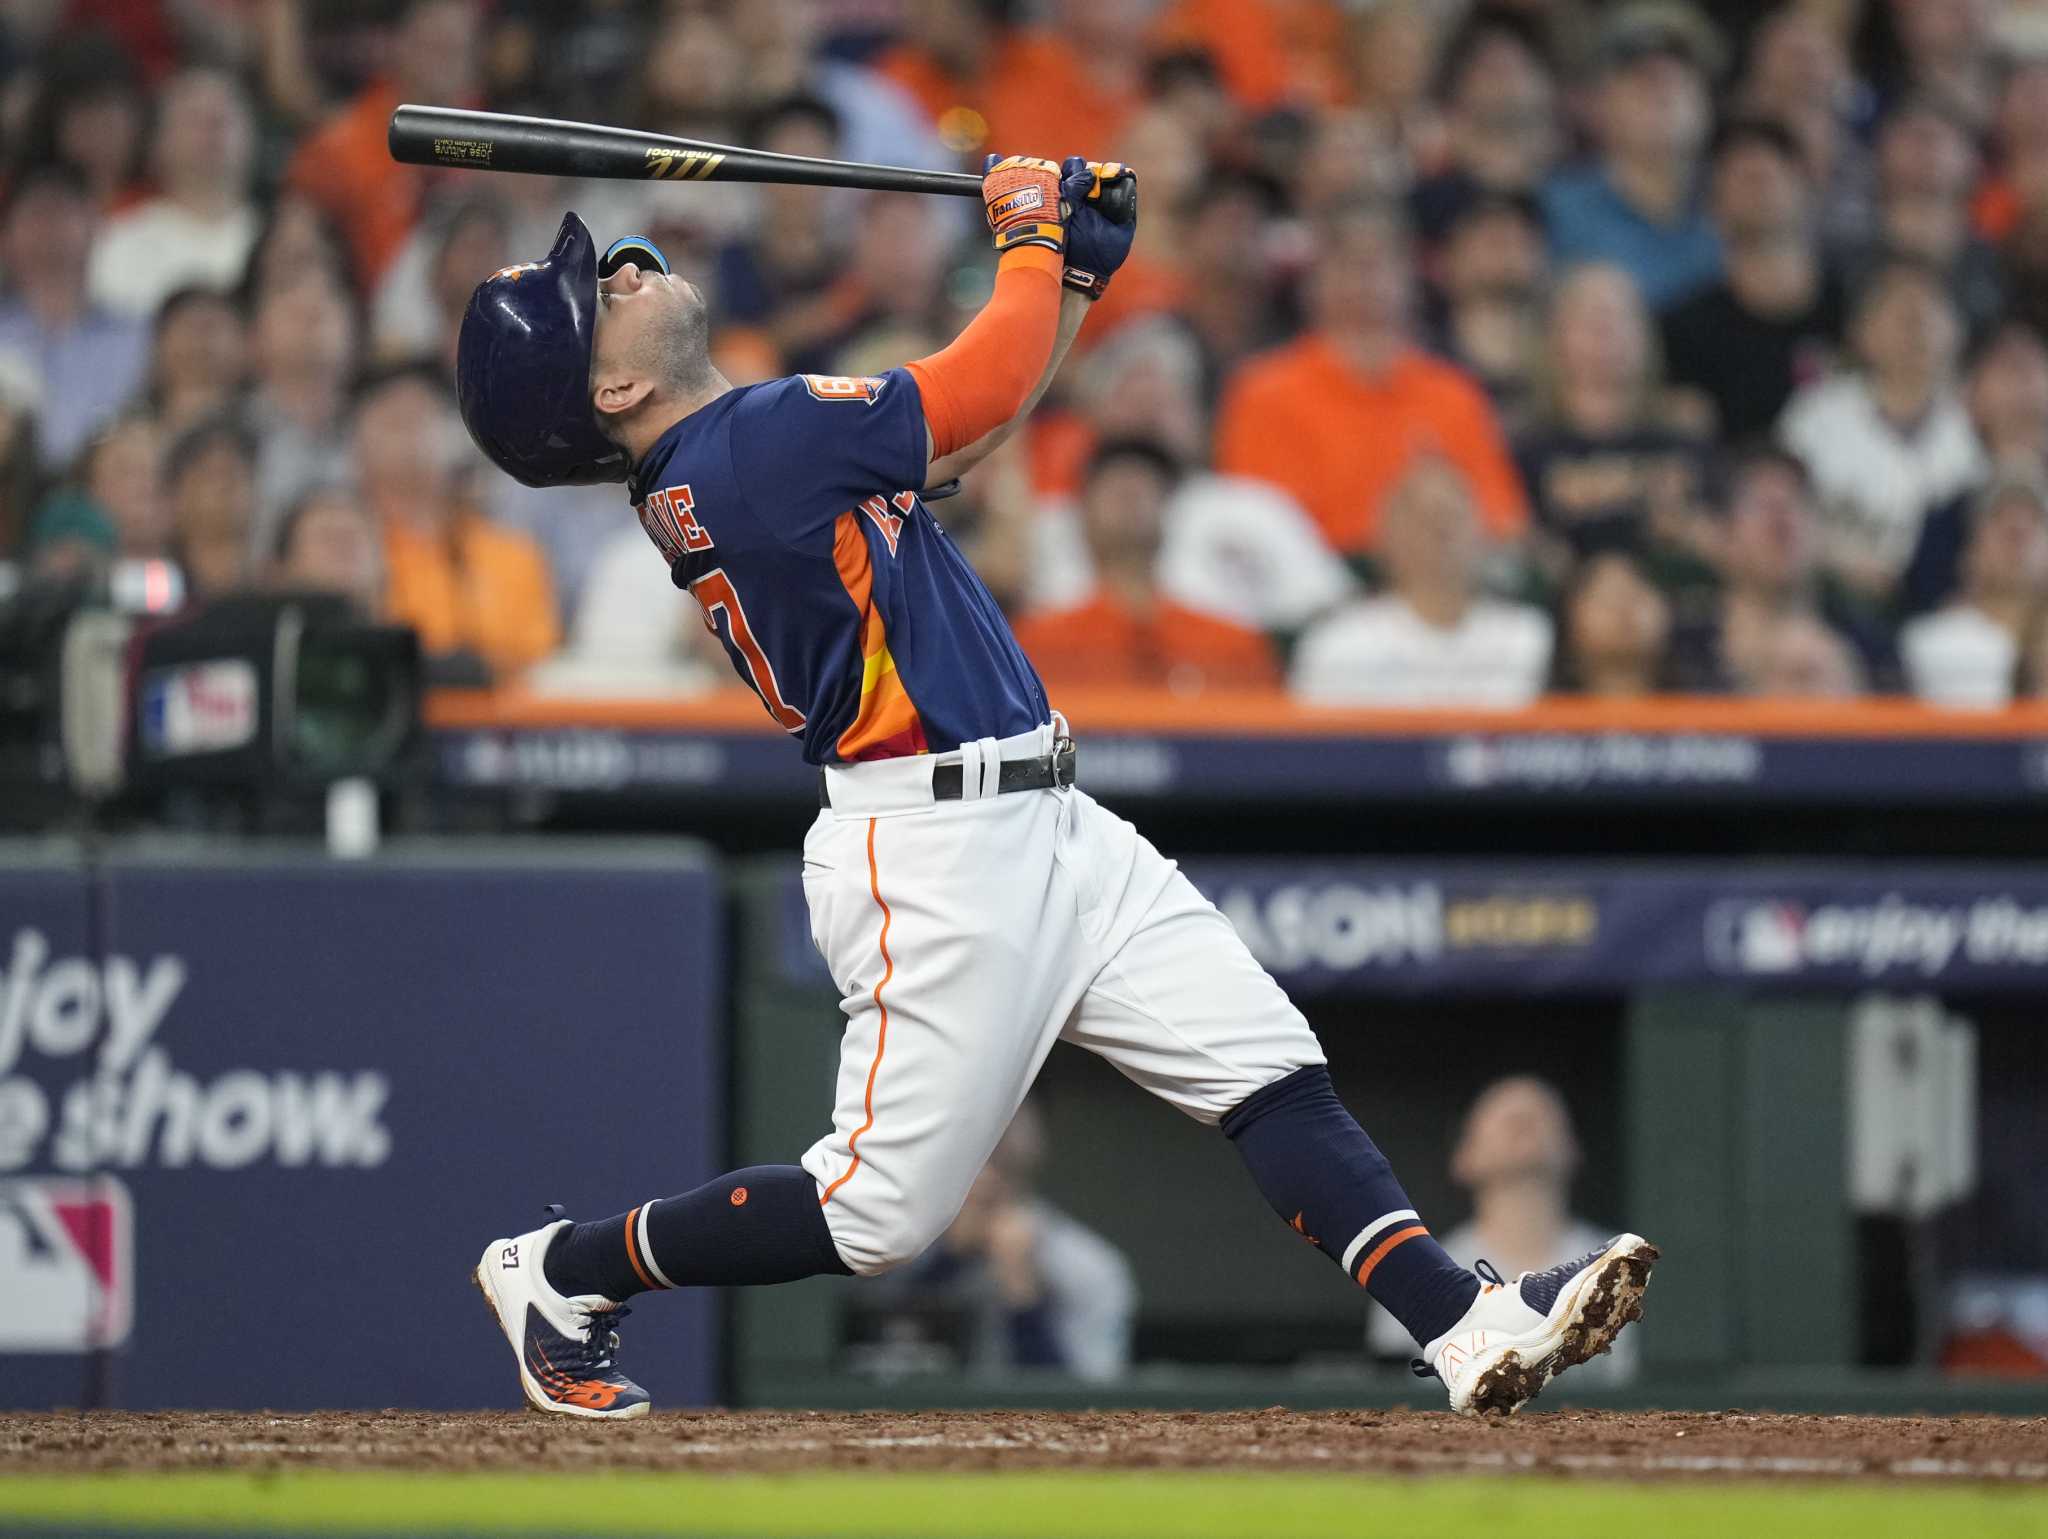 Astros sign Jose Altuve to 5-year extension - MLB Daily Dish